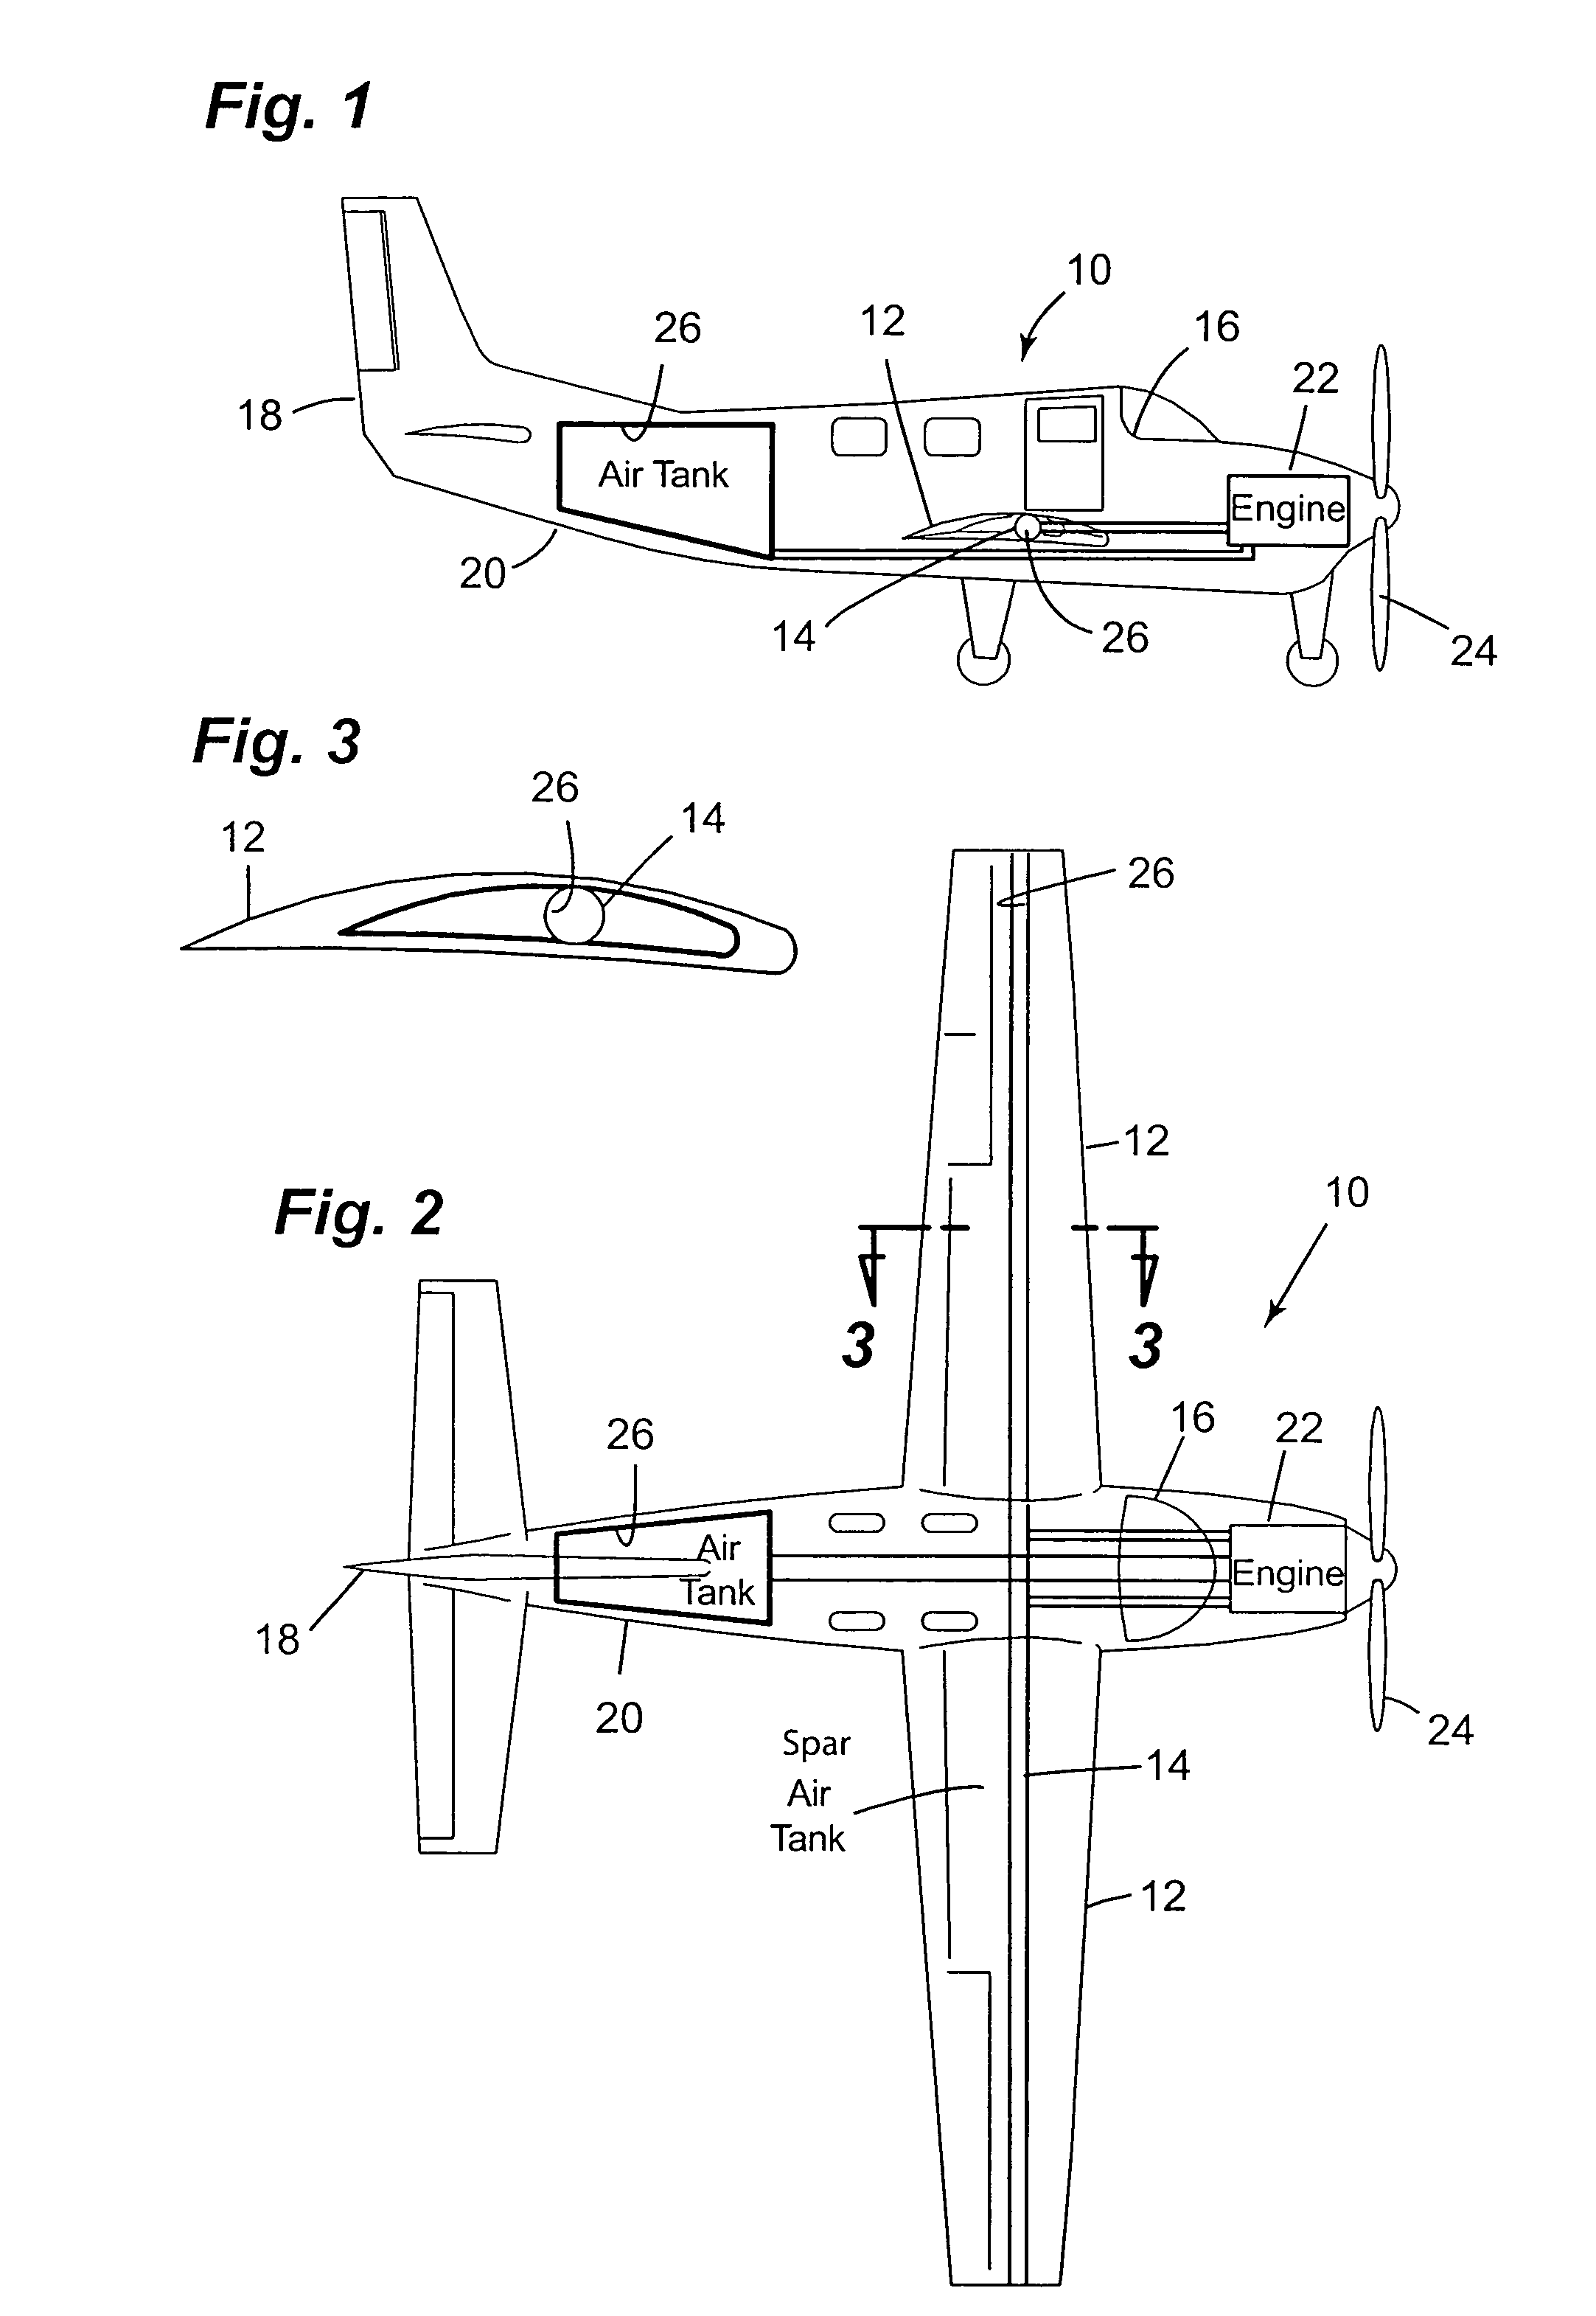 Split-cycle aircraft engine